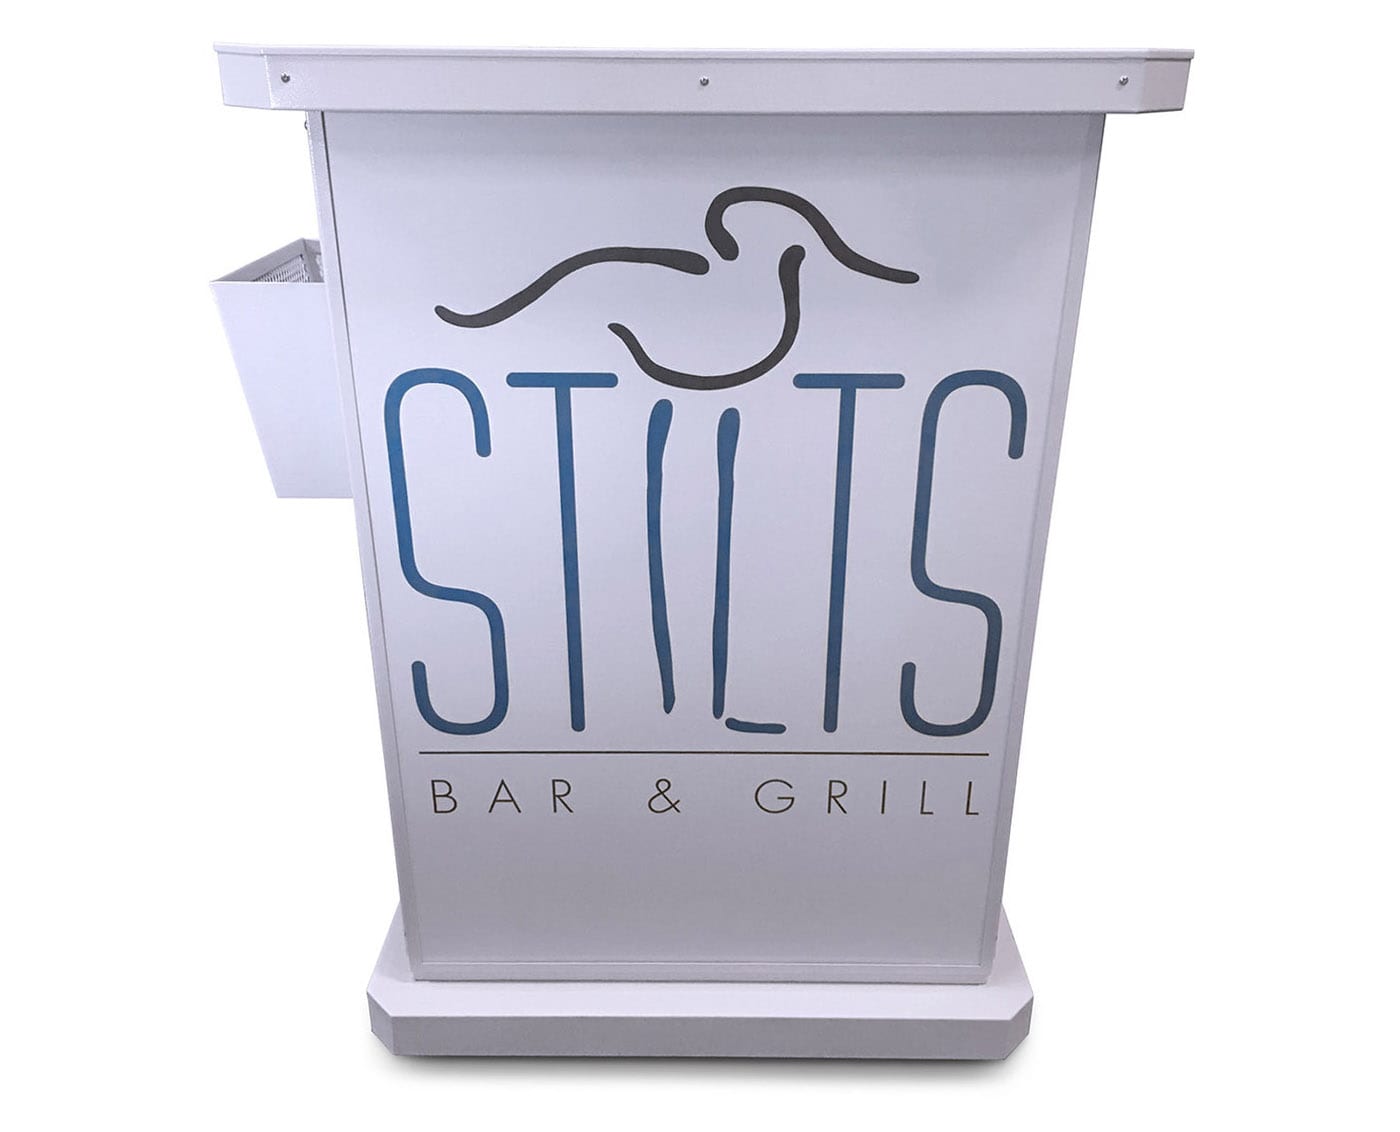 Stilts Bar and Grill Deluxe Hostess Stand White Frame with Menu Holder